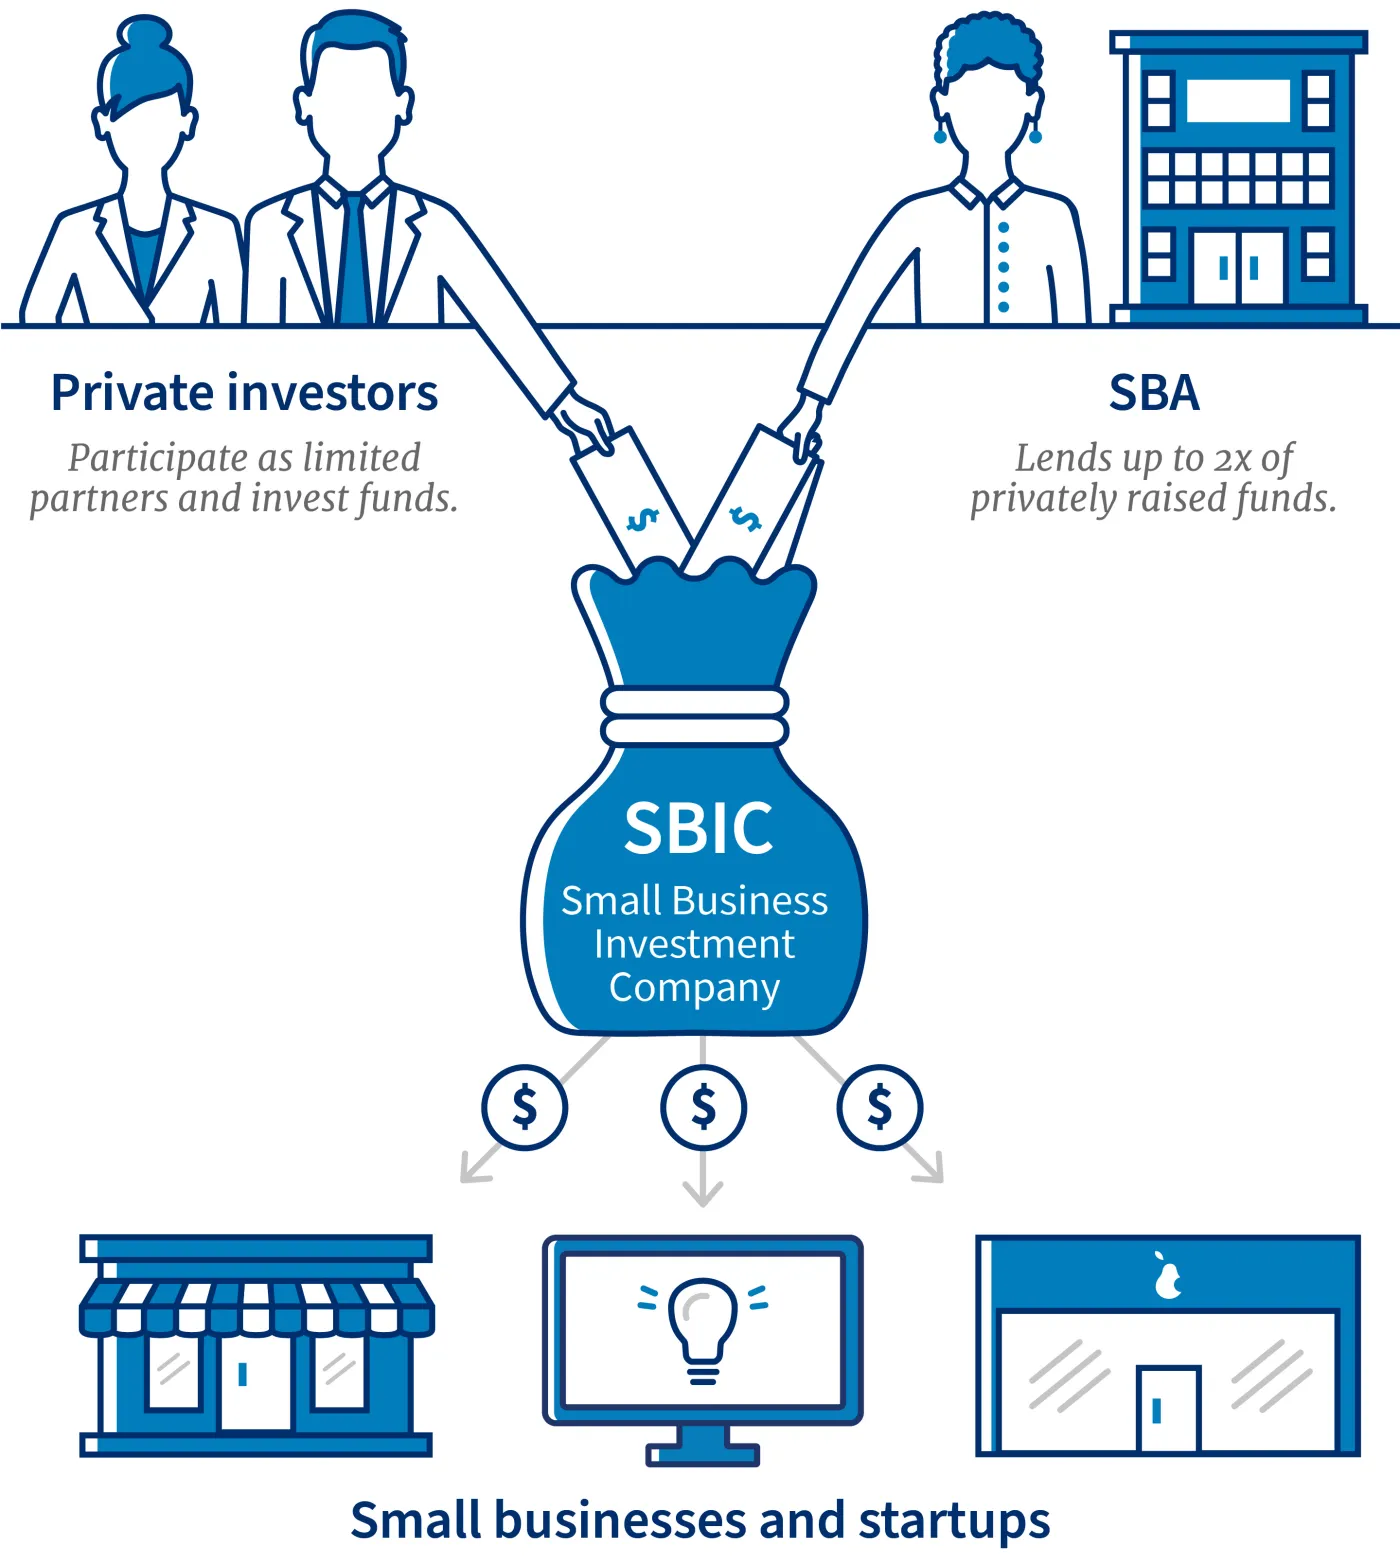 Private investors can participate with limited funds, but SBA lends up to 2 times privately raised funds to small businesses and startups through SBIC investments.